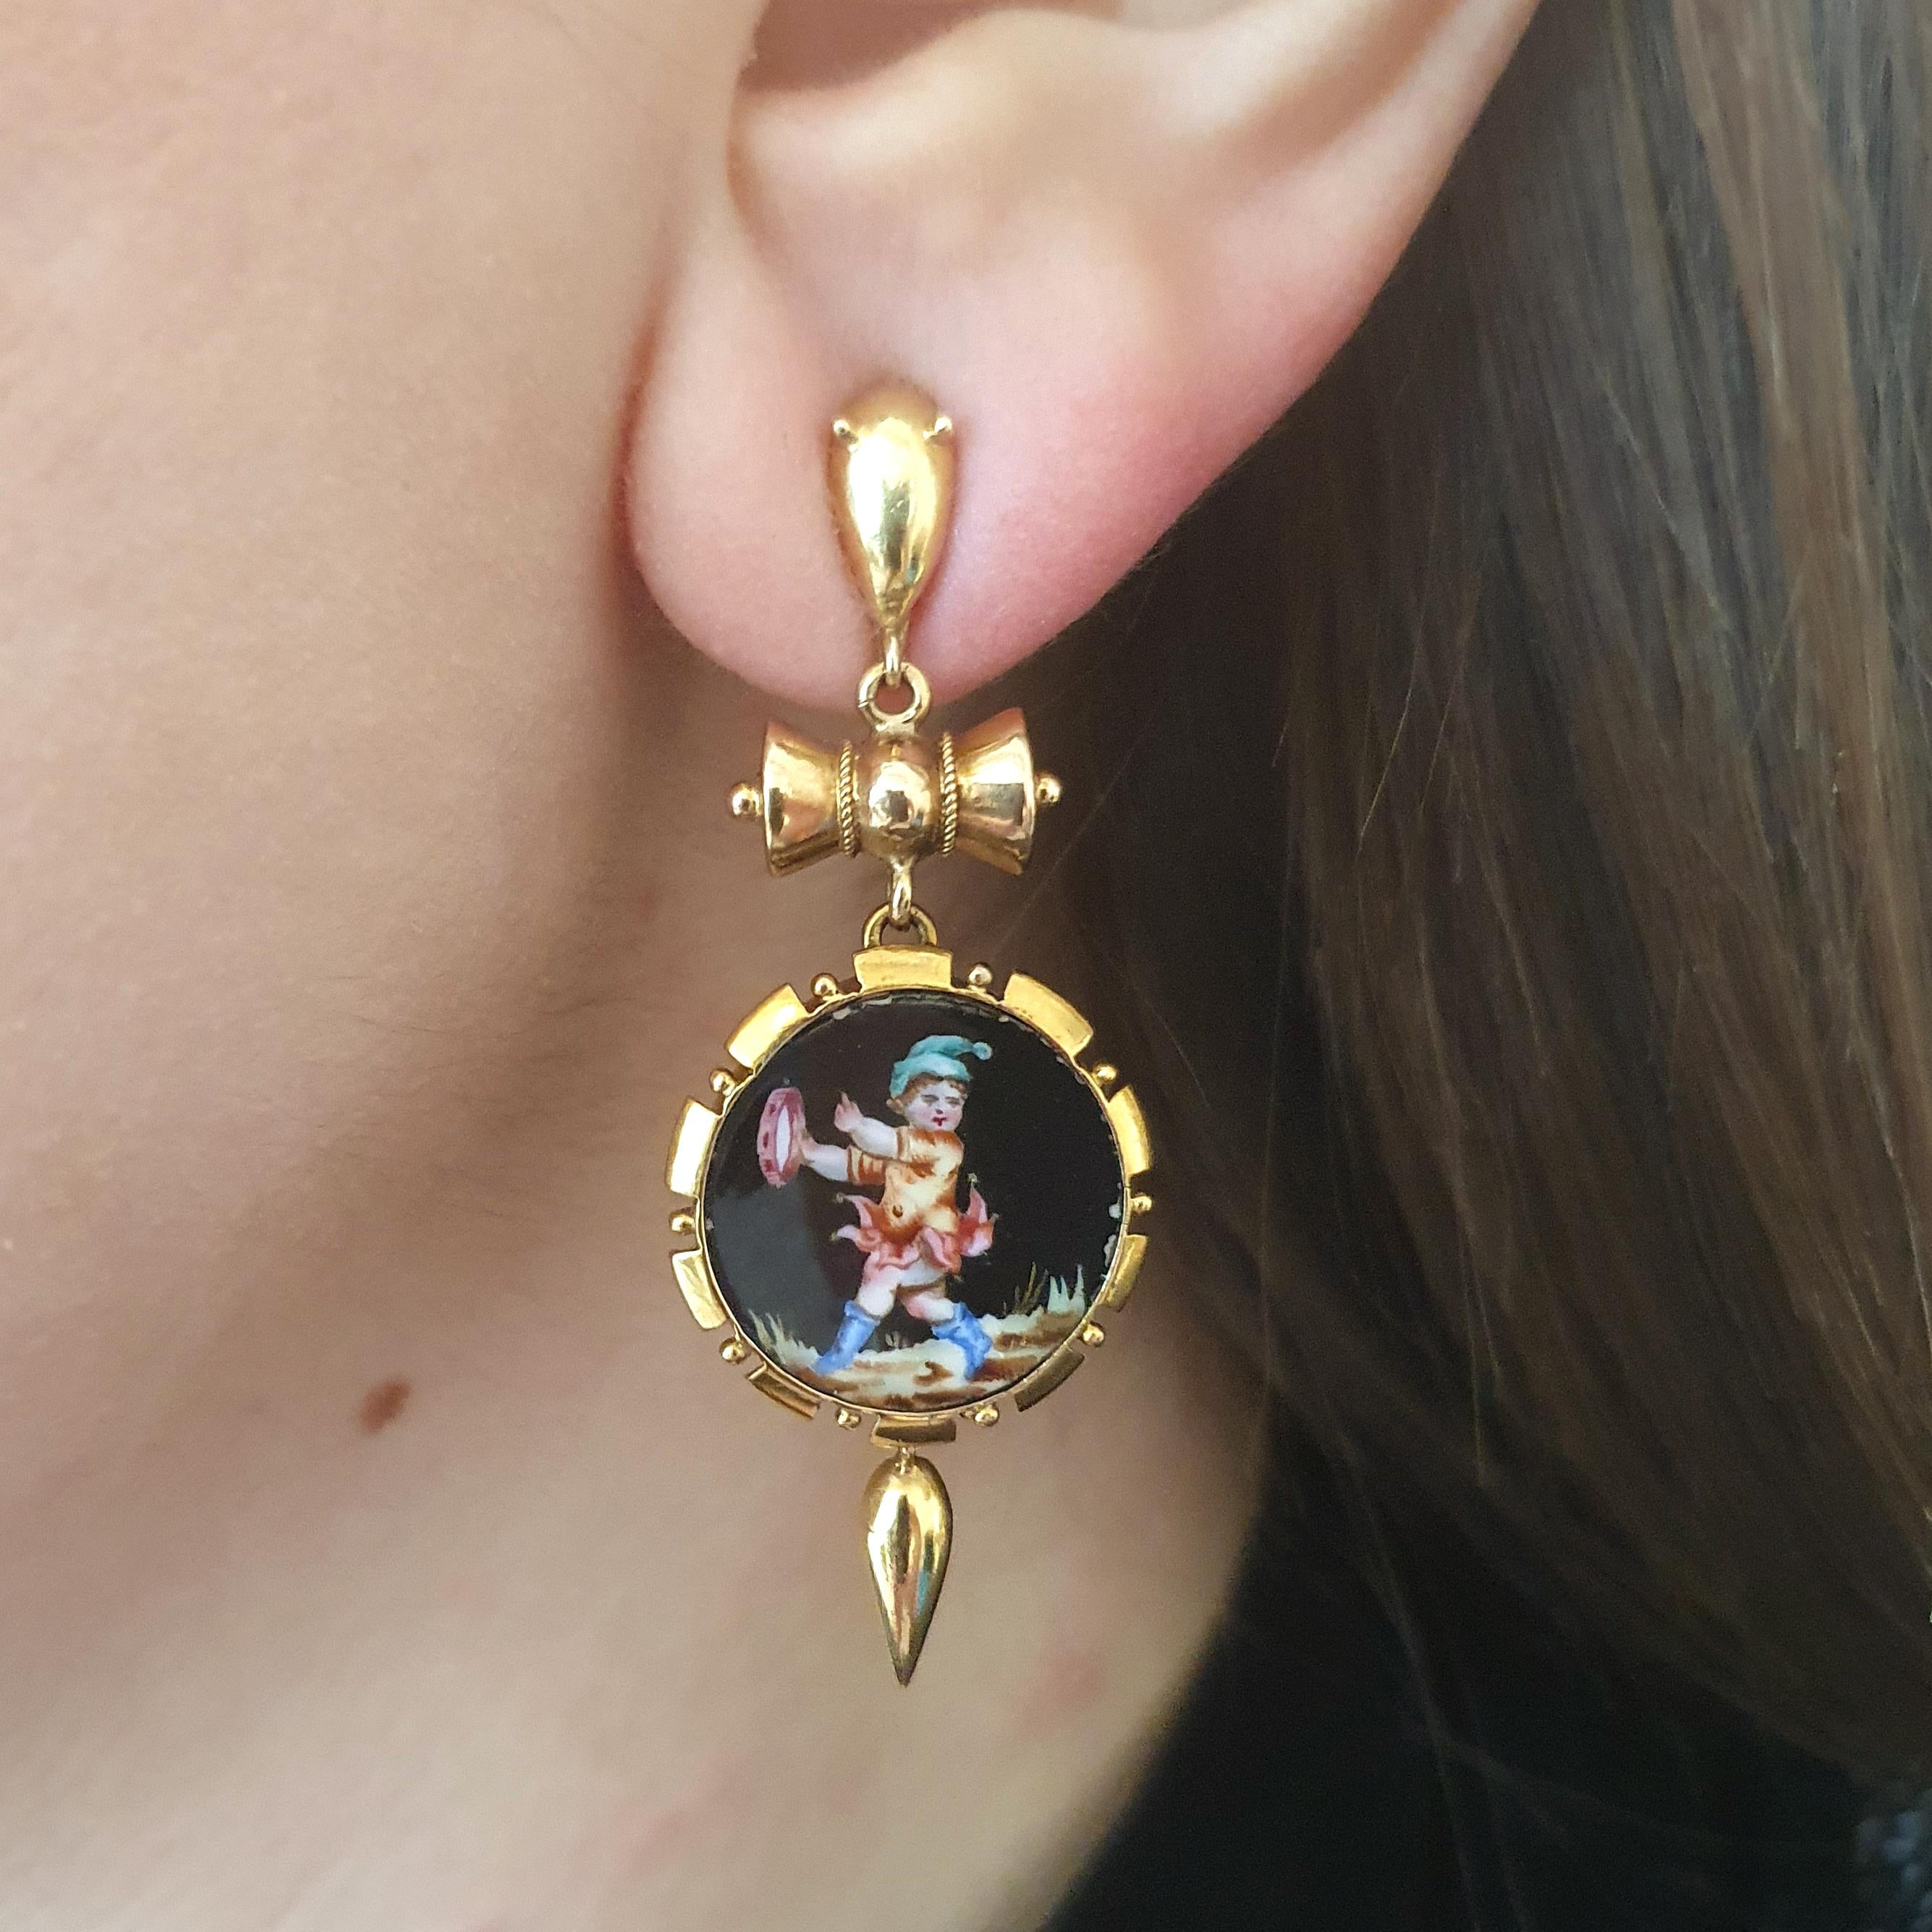 Lovely earrings holding folklore characters on porcelain mounted on yellow gold.

Total length: 5.20 cm.
Width max. : 2.00cm.
Total weight: 7.24 grams.
